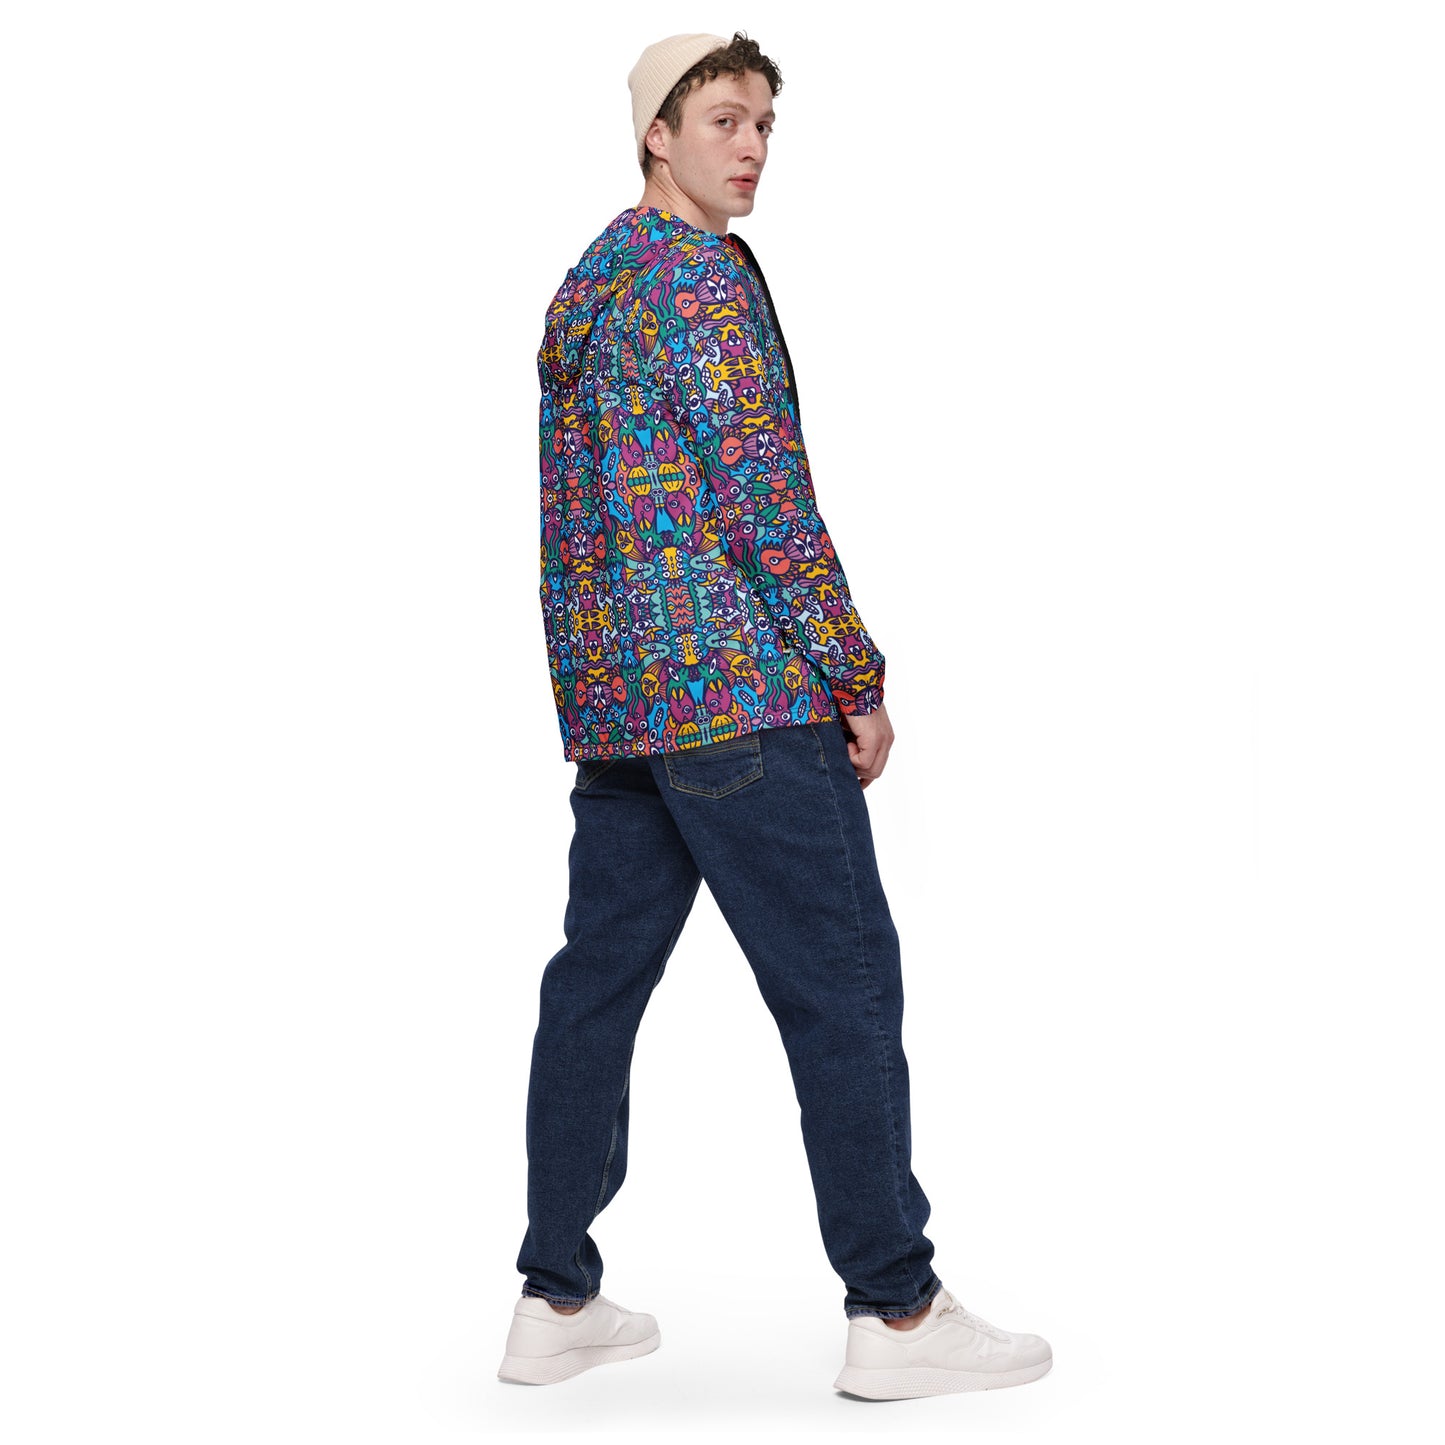 Whimsical design featuring multicolor critters from another world Men’s windbreaker. Lifestyle